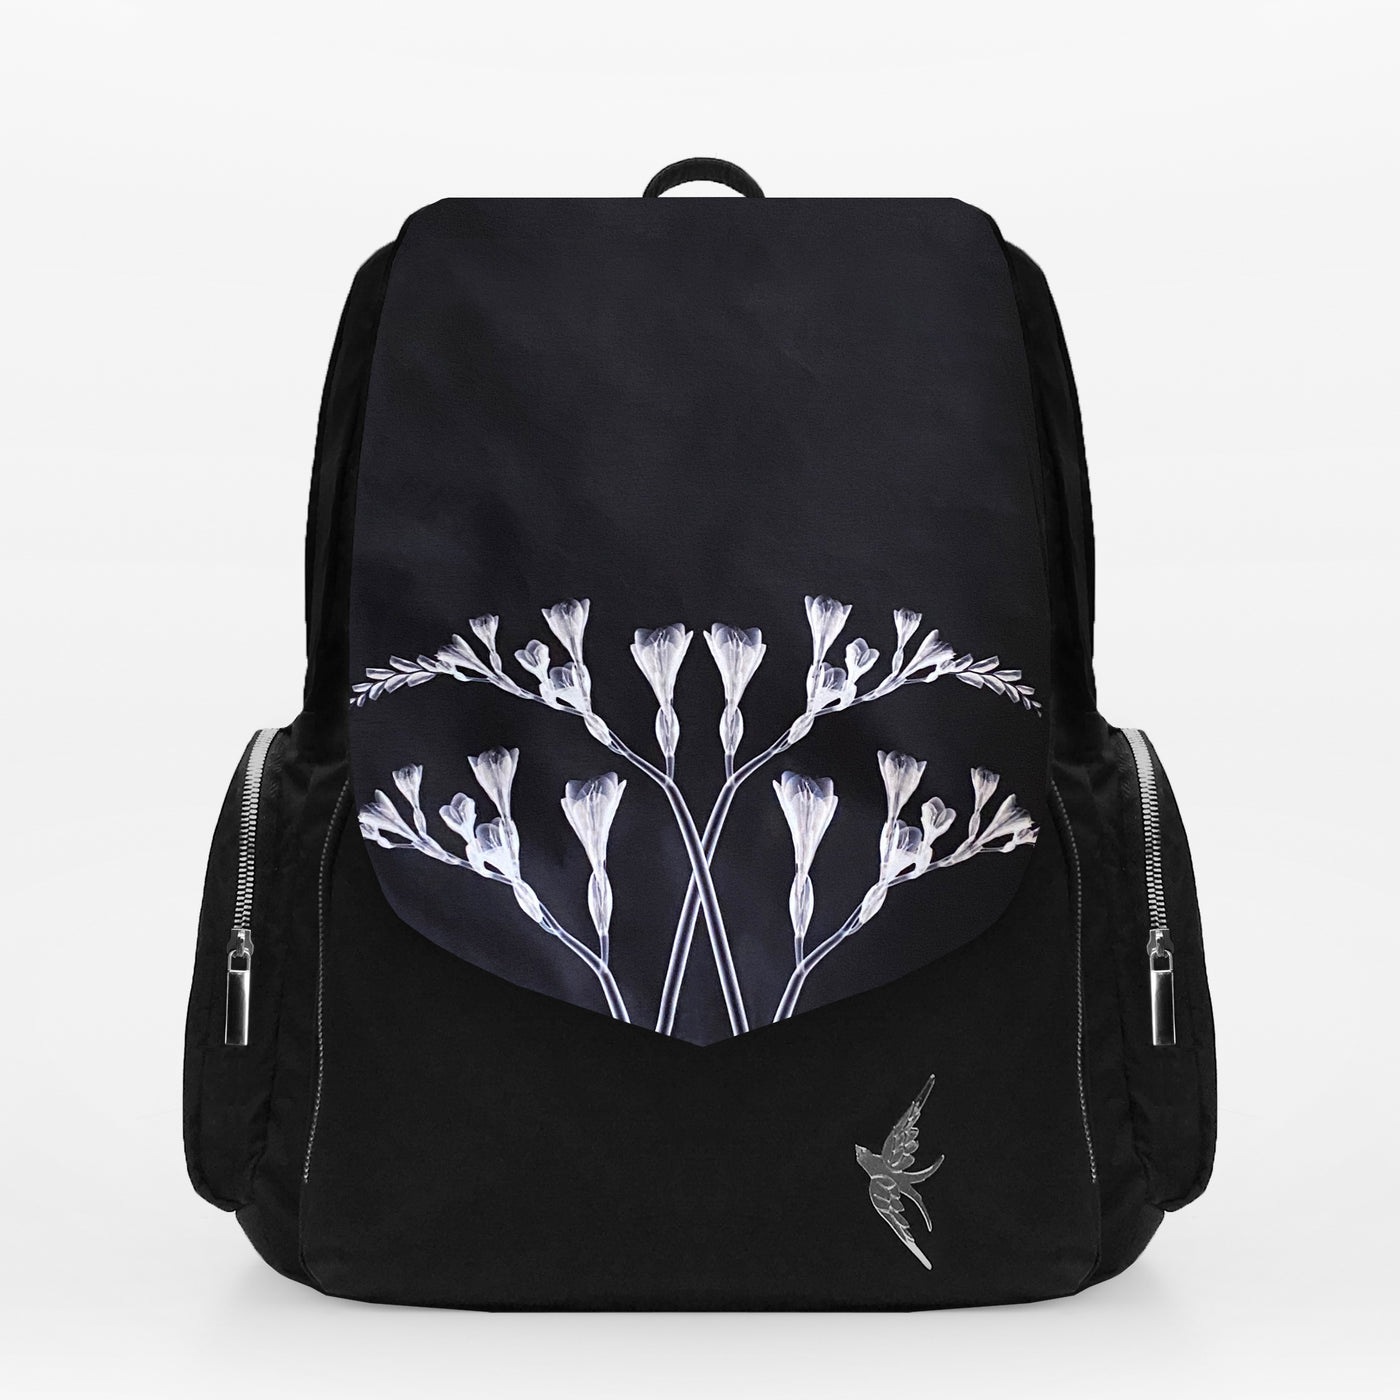 Laptop Backpack with the White Freesia Print